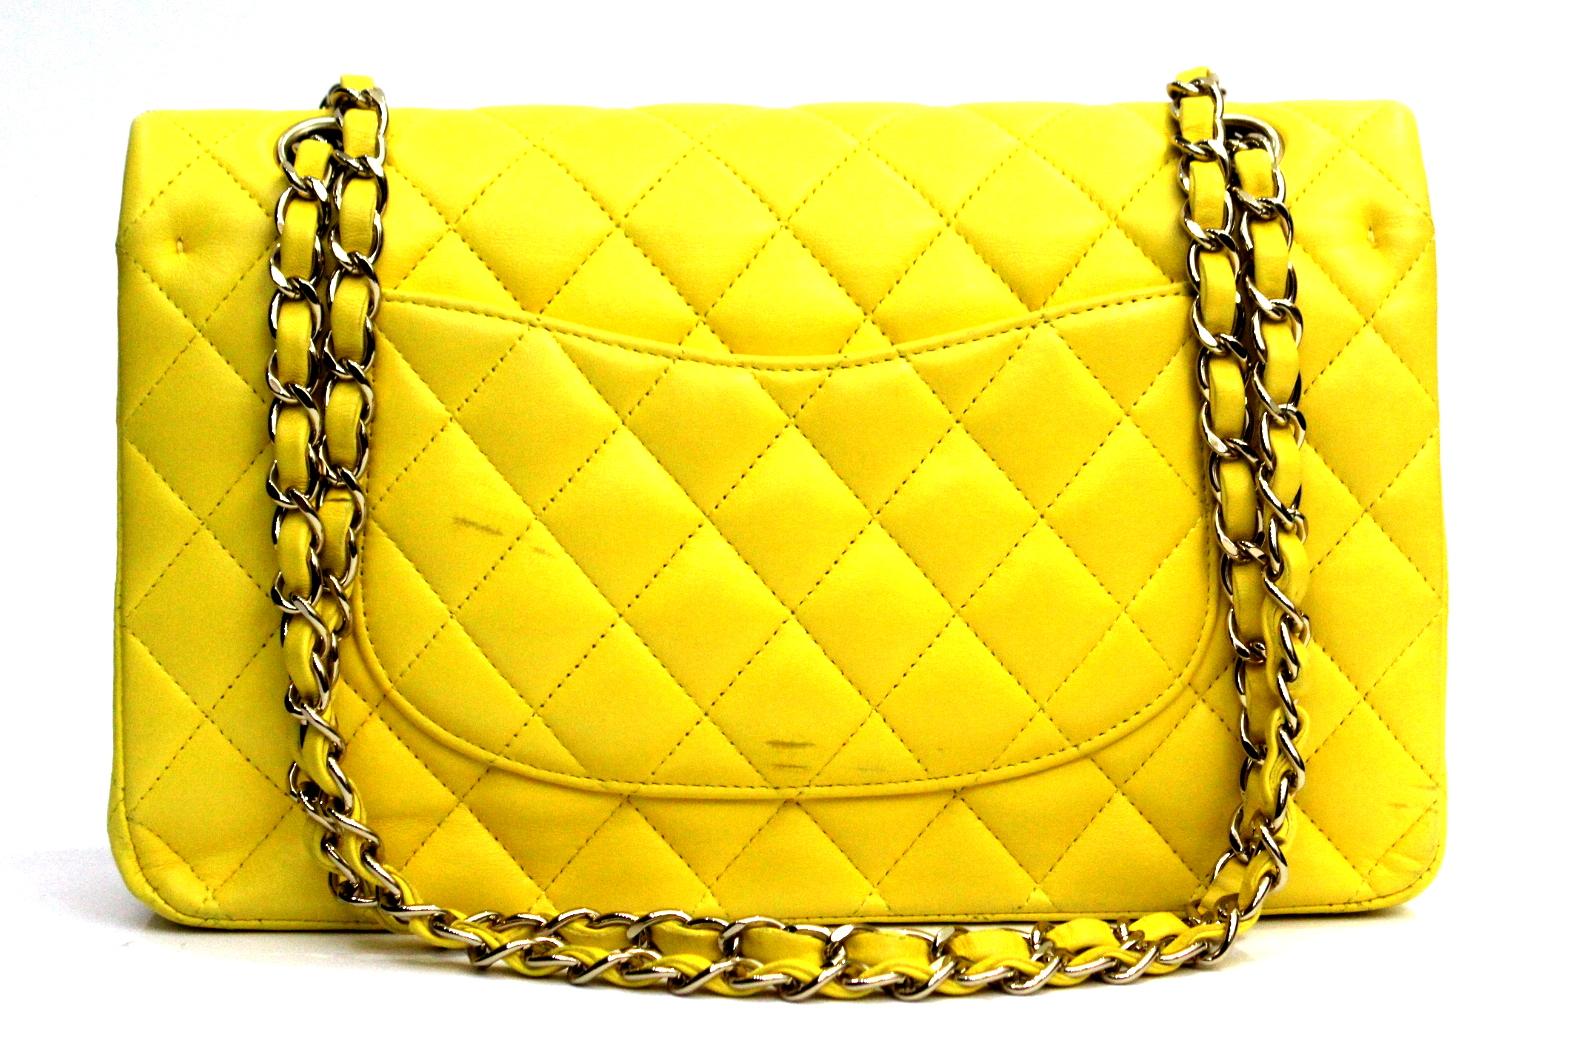 Get your hands on this gorgeous Chanel Double Flap 2.55 bag. Made from lambskin leather, this bag is chic and sophisticated. The yellow color makes this bag stand out everywhere you go. Accentuated with gold hardware, this bag is luxurious and